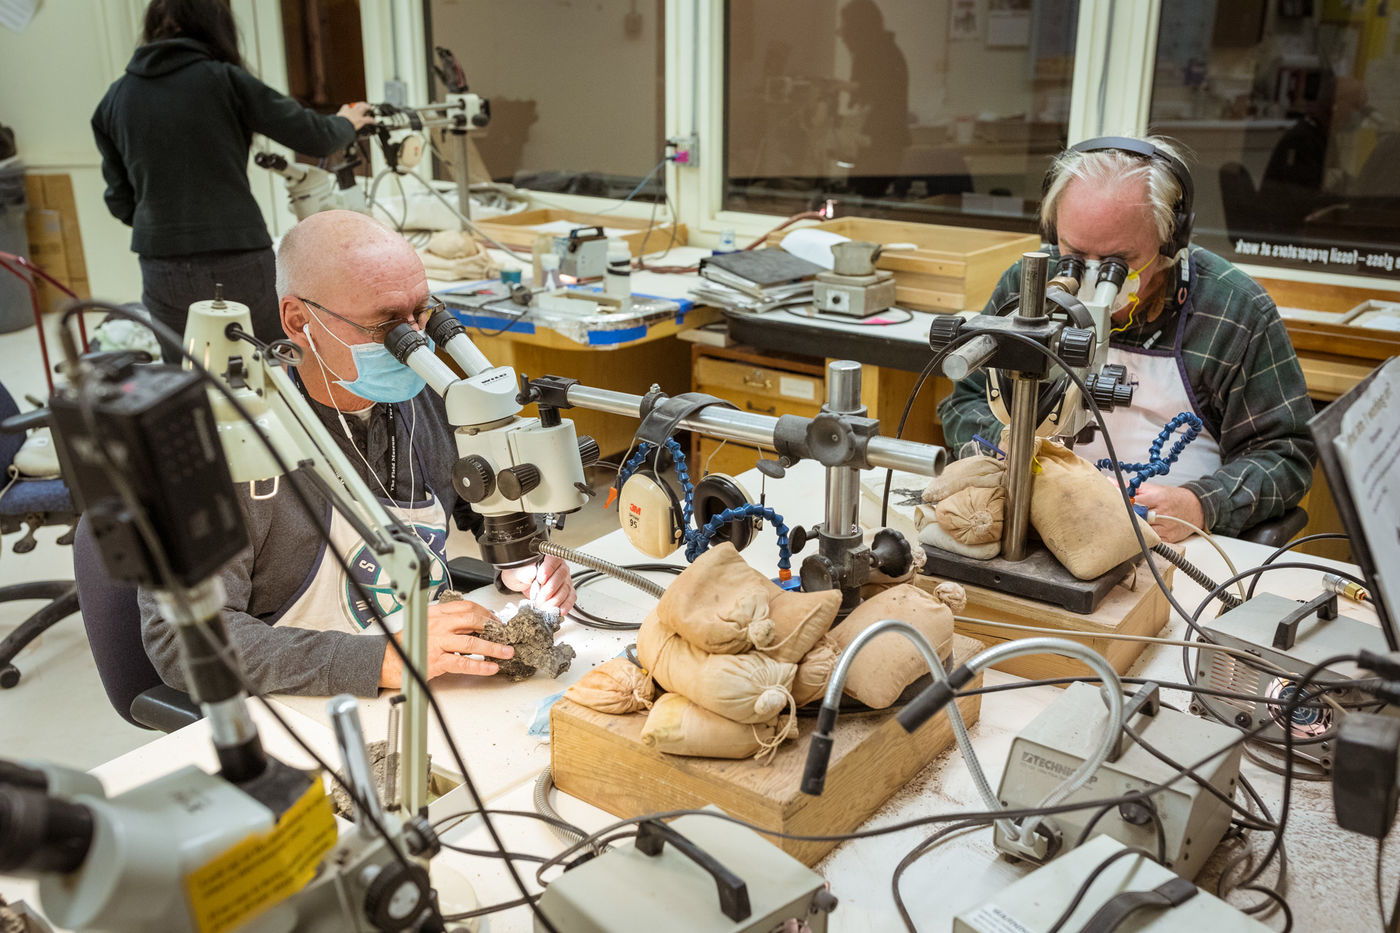 Two volunteers sit at a table and look into microscopes while they carve away at fossils. A woman in the background handles another microscope.